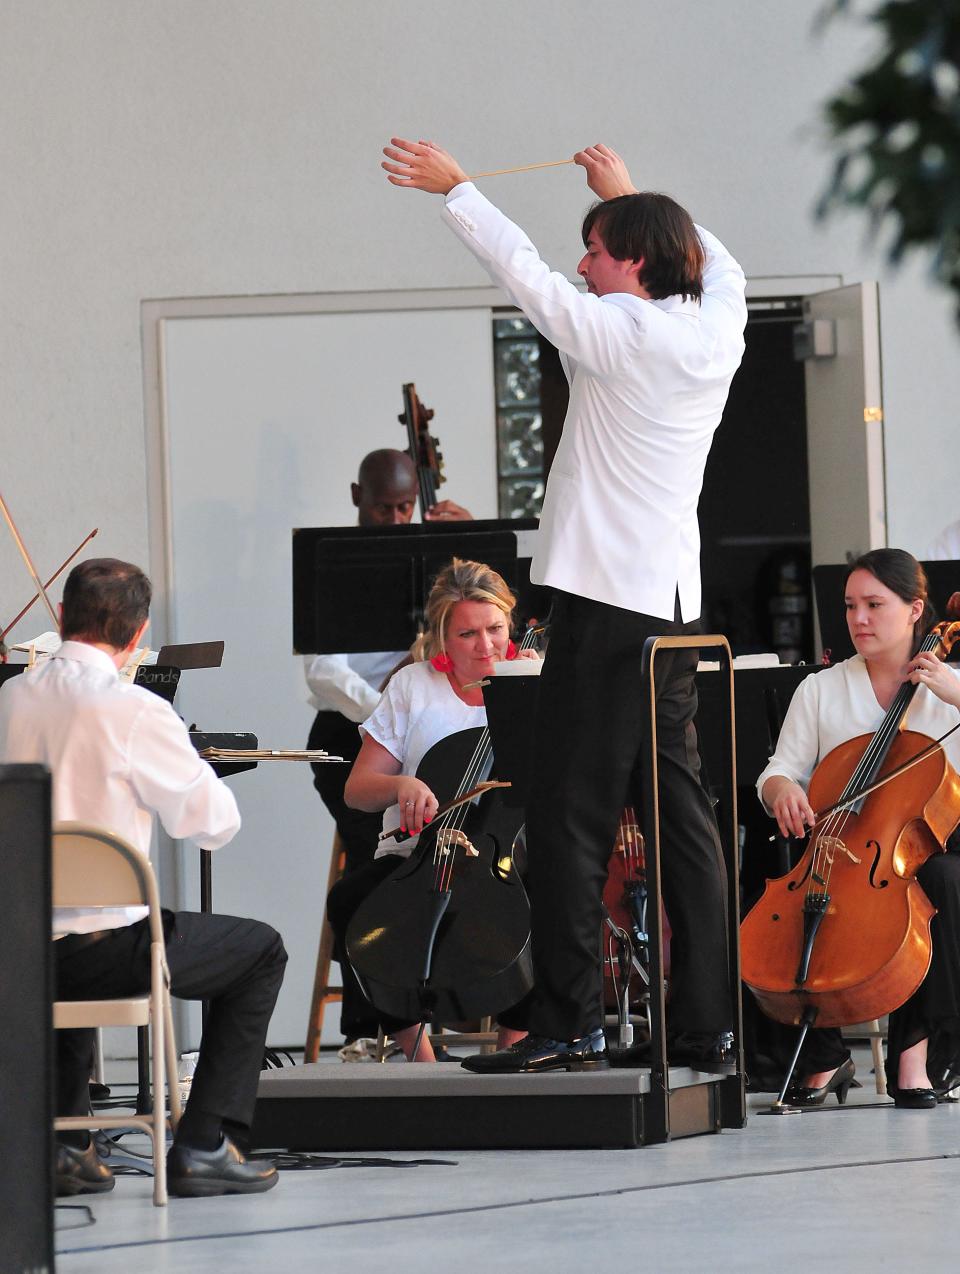 Ashland Symphony Orchestra’s annual Pops in the Park Concert took place Sunday, July 3, 2022 at Guy C. Myers Memorial Bandshell, with new Conductor and Music Director Michael Repper leading the orchestra.